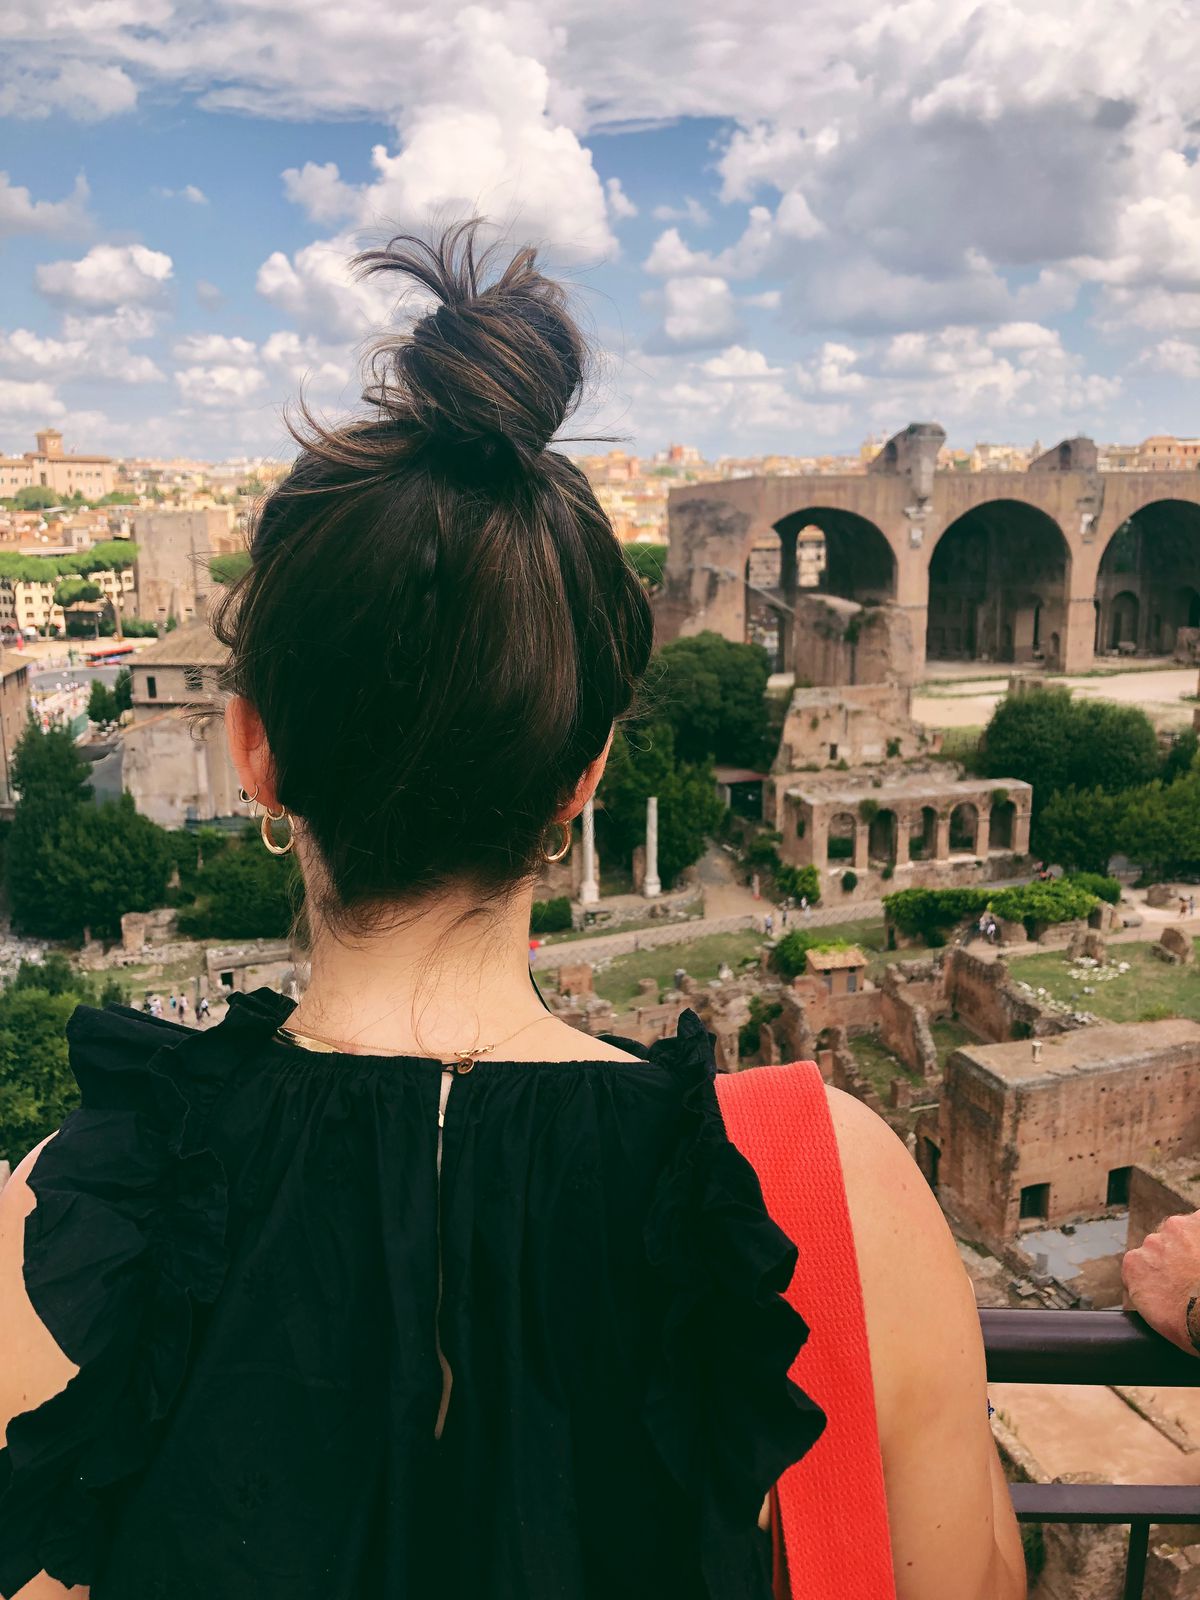 A woman with her back toward the camera looks out into architectural ruins.